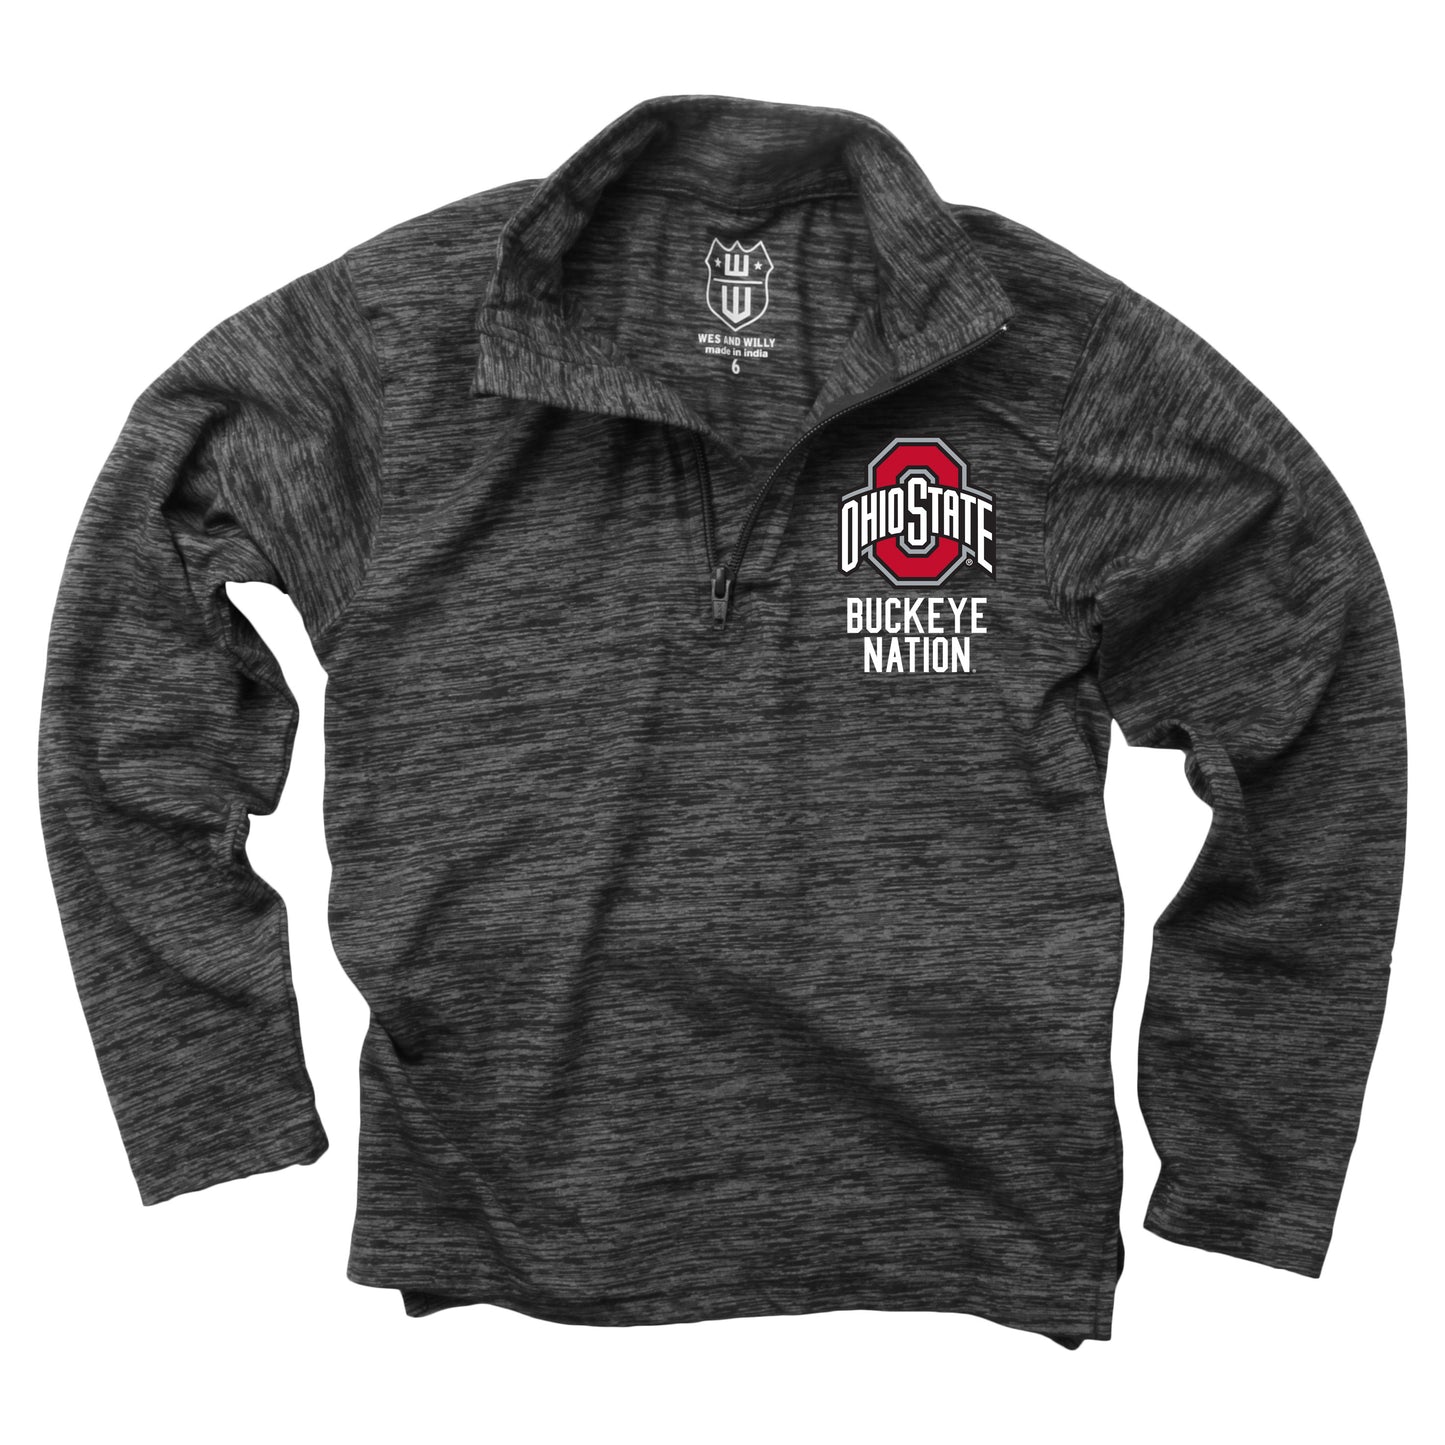 Ohio State Buckeyes Wes and Willy Youth Boys Cloudy Yarn Long Sleeve College Quarter Zip - Black